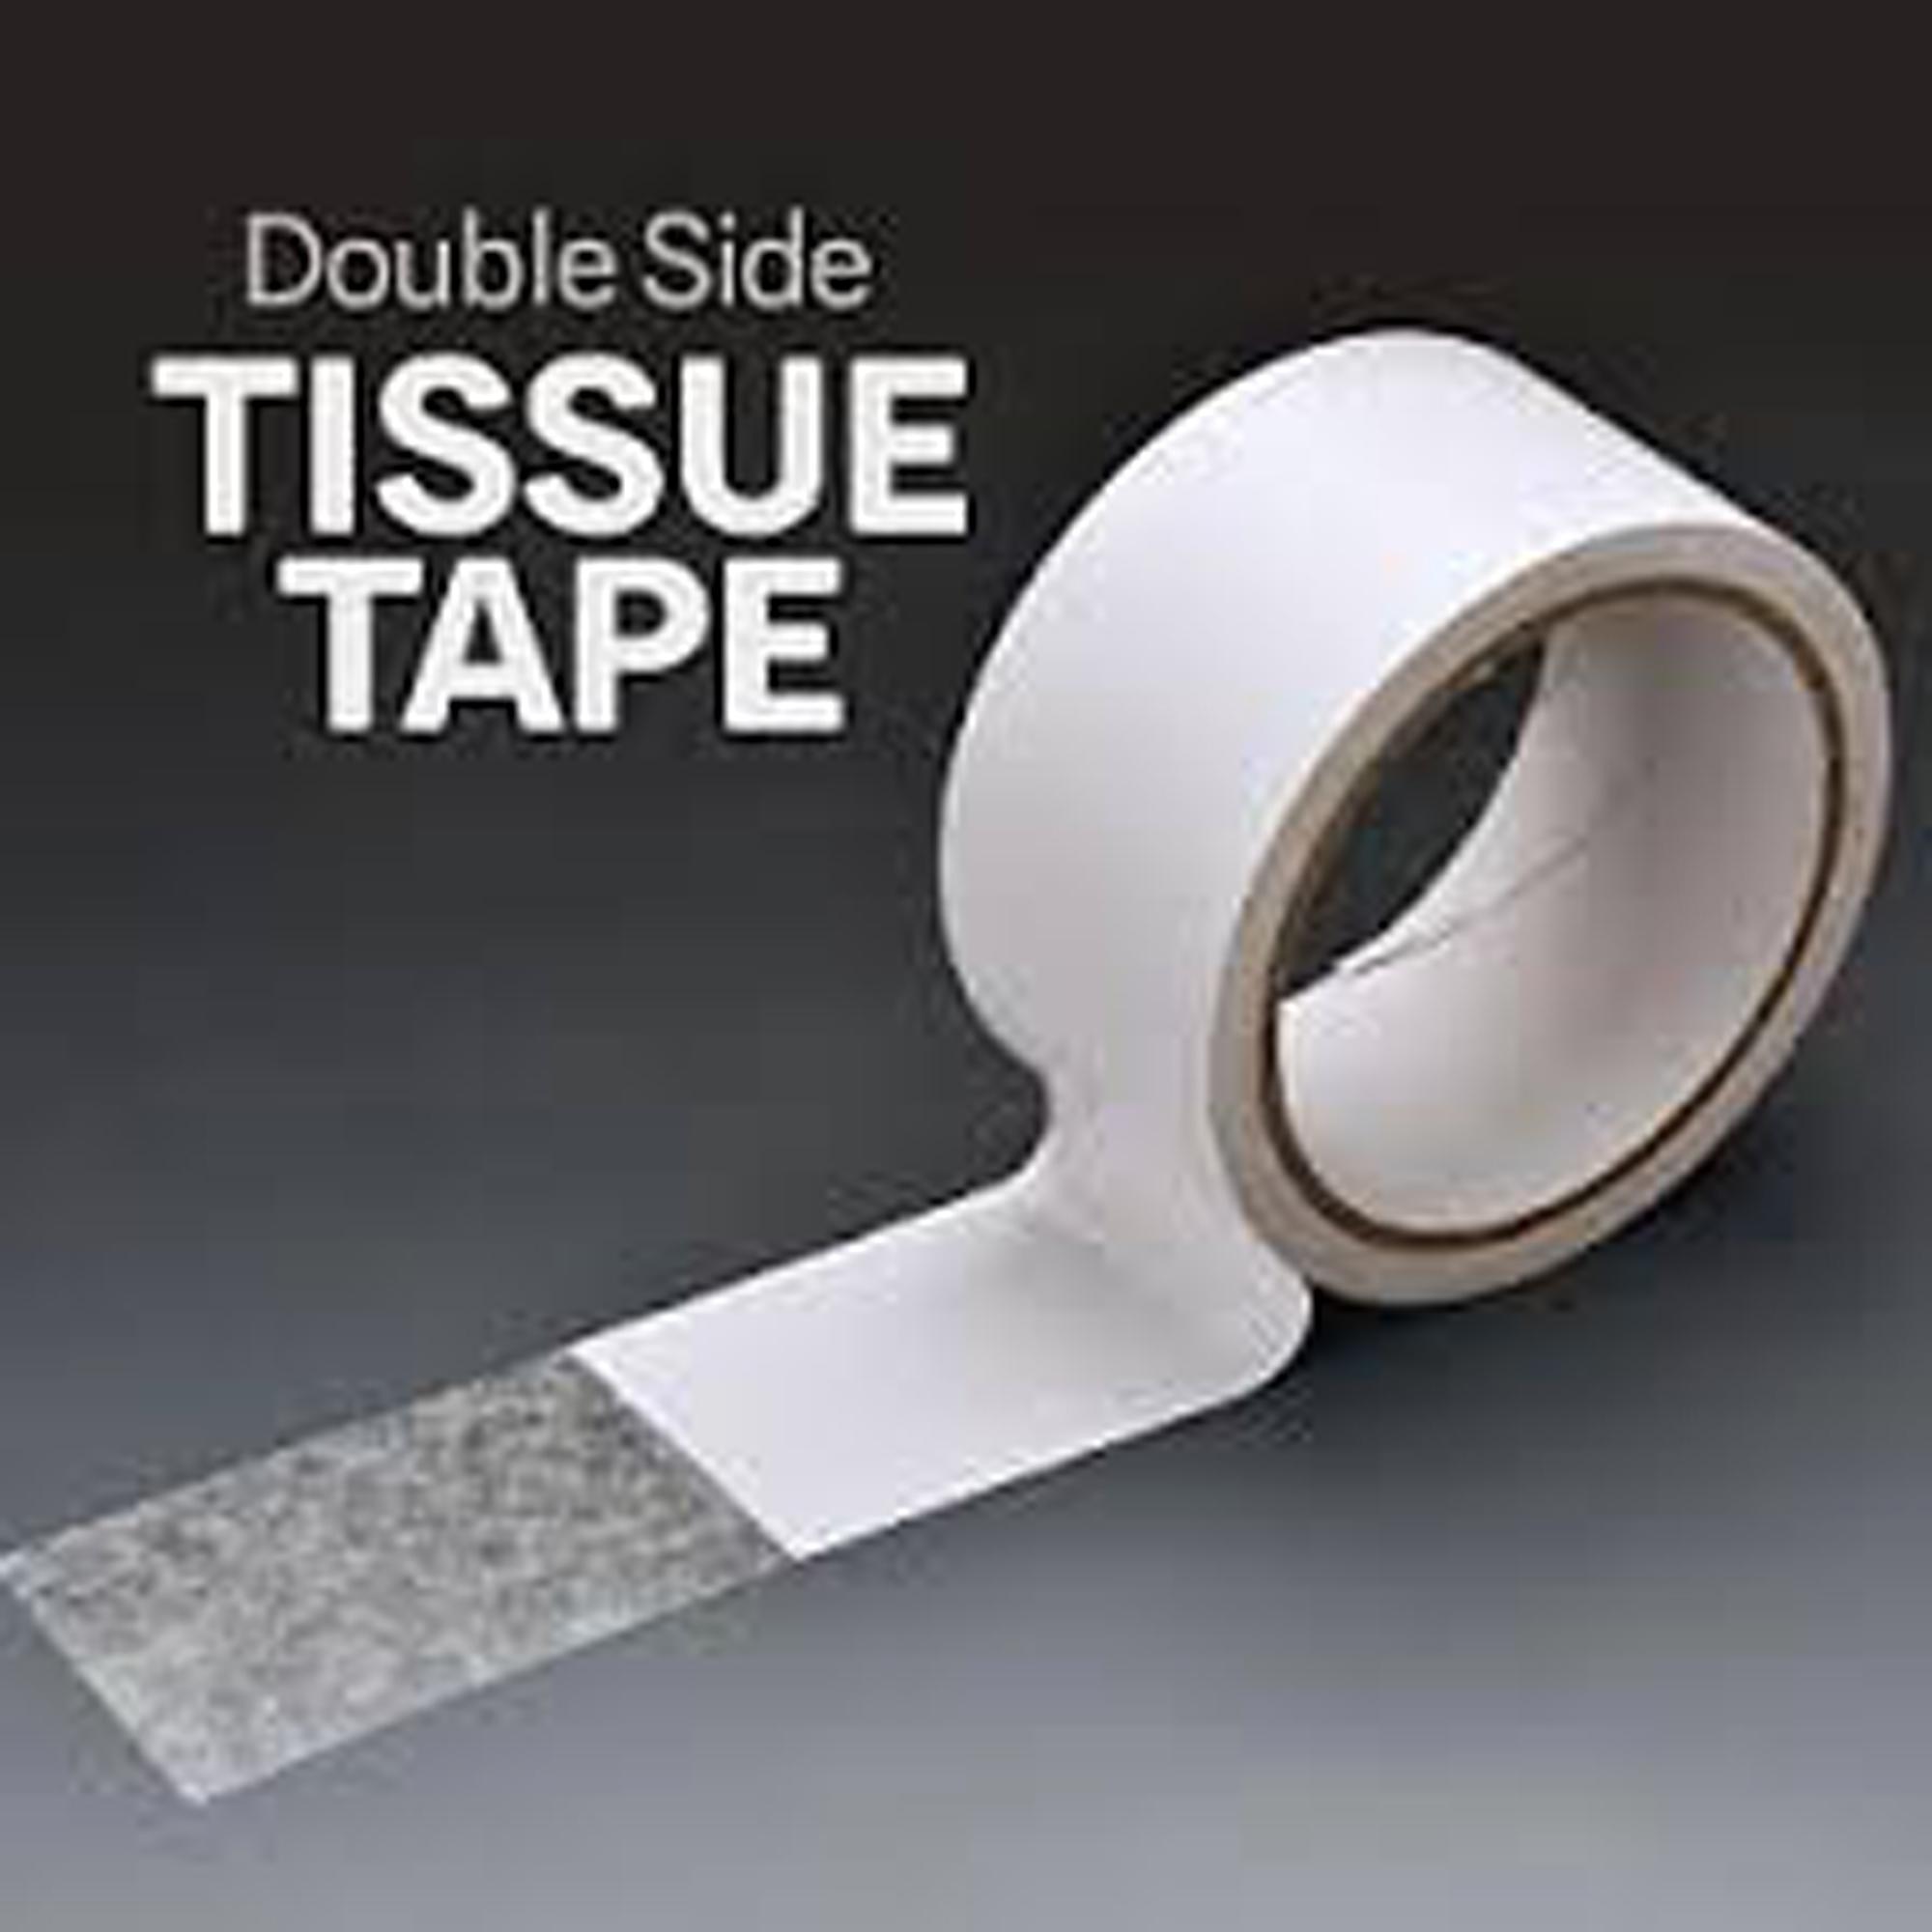 Double Side Tape 1 Pcs Buy Online At Best Prices In Pakistan Daraz Pk